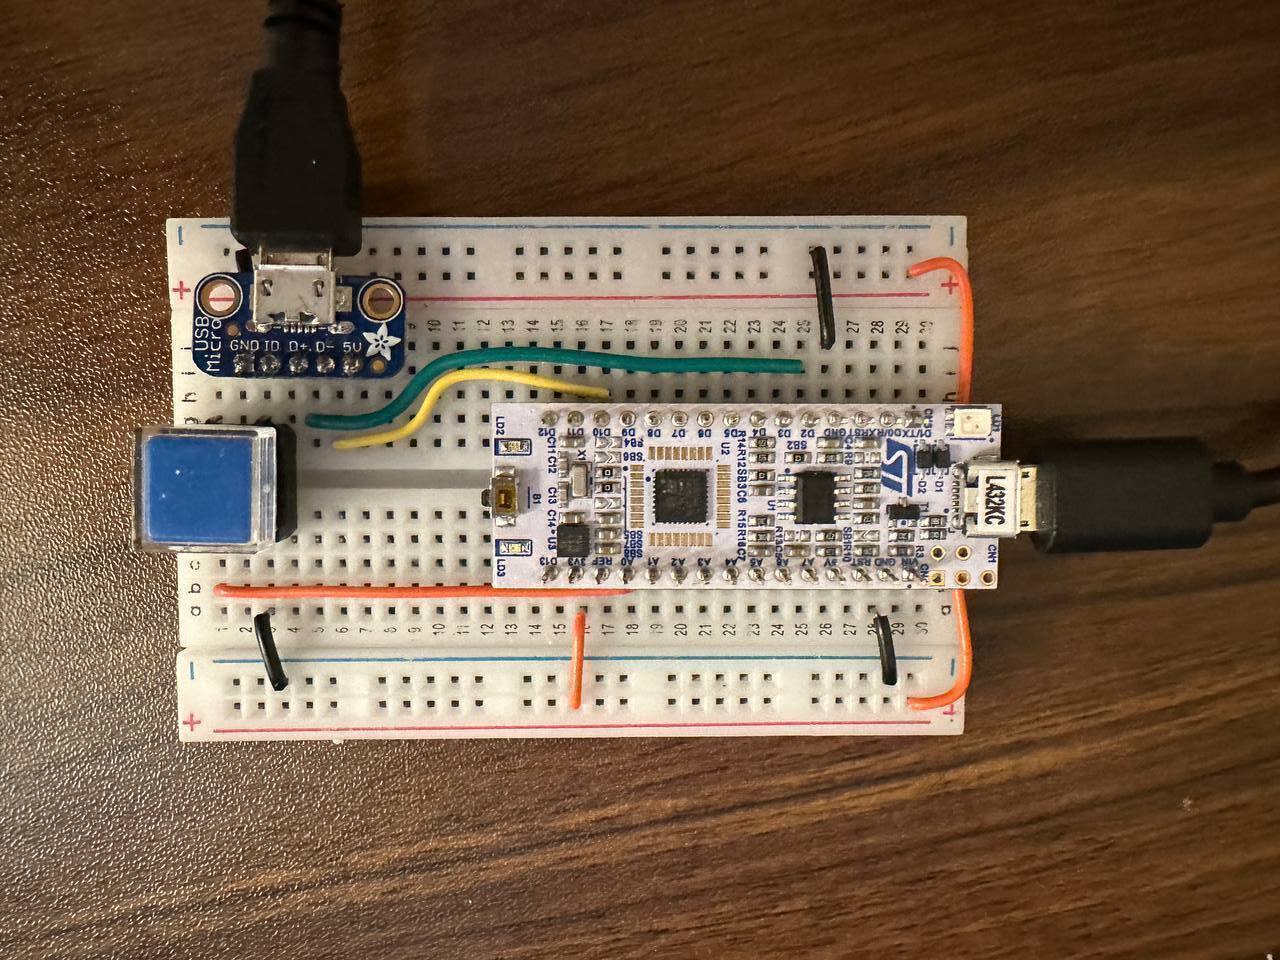 Plat's hardware consists of an
STM32L432KC development board, a peripheral USB port, and a button.